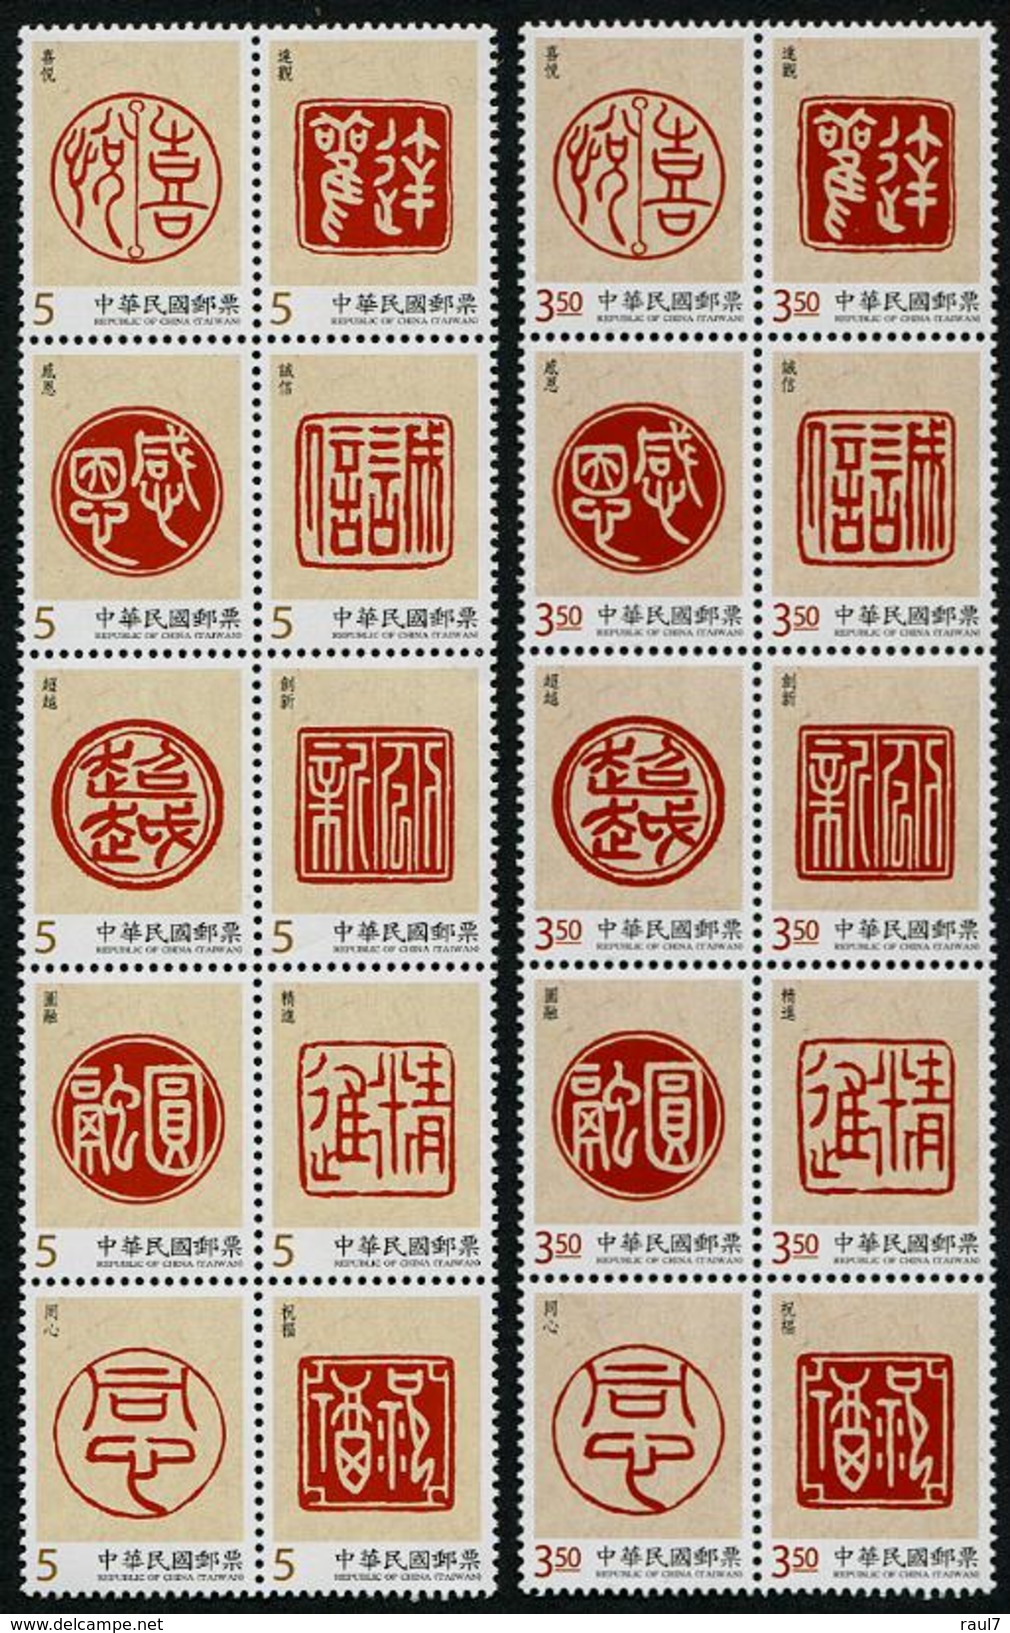 TAIWAN 2016 - L'Or De Midas, Timbres De Voeux - 20 Val Neuf // Mnh Greeting Stamps - Ungebraucht